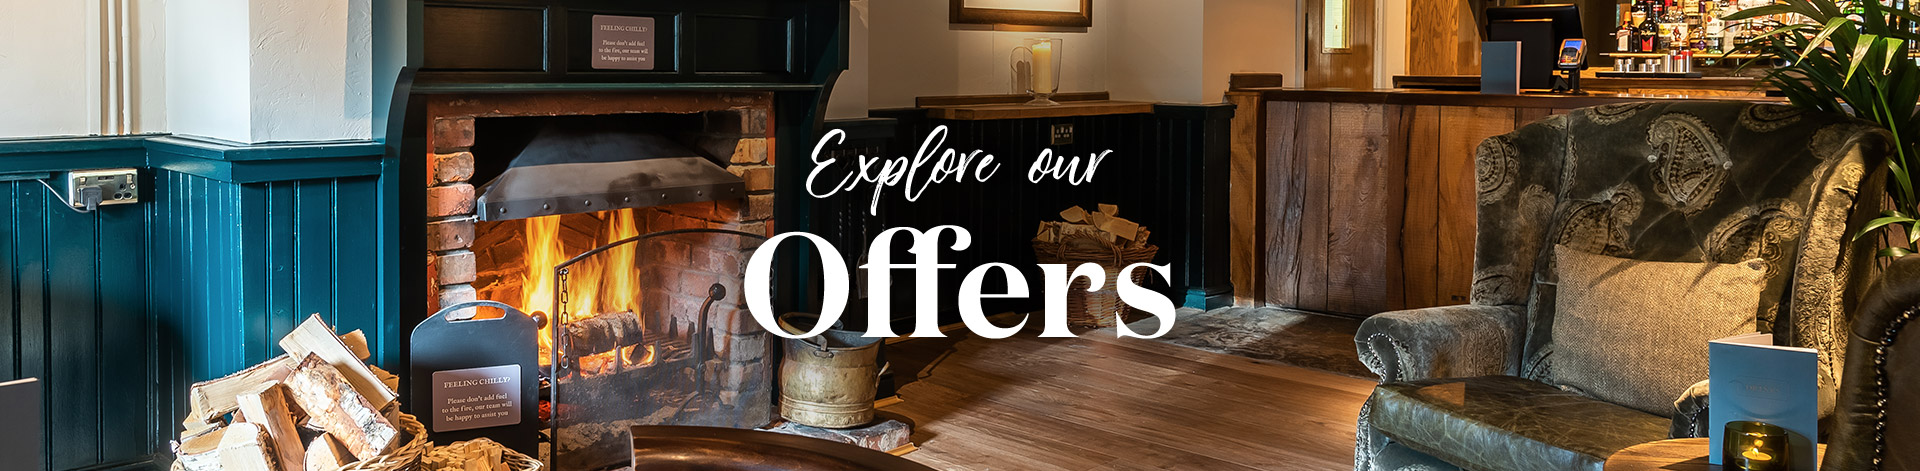 Our latest offers at The Smuggler's Rest